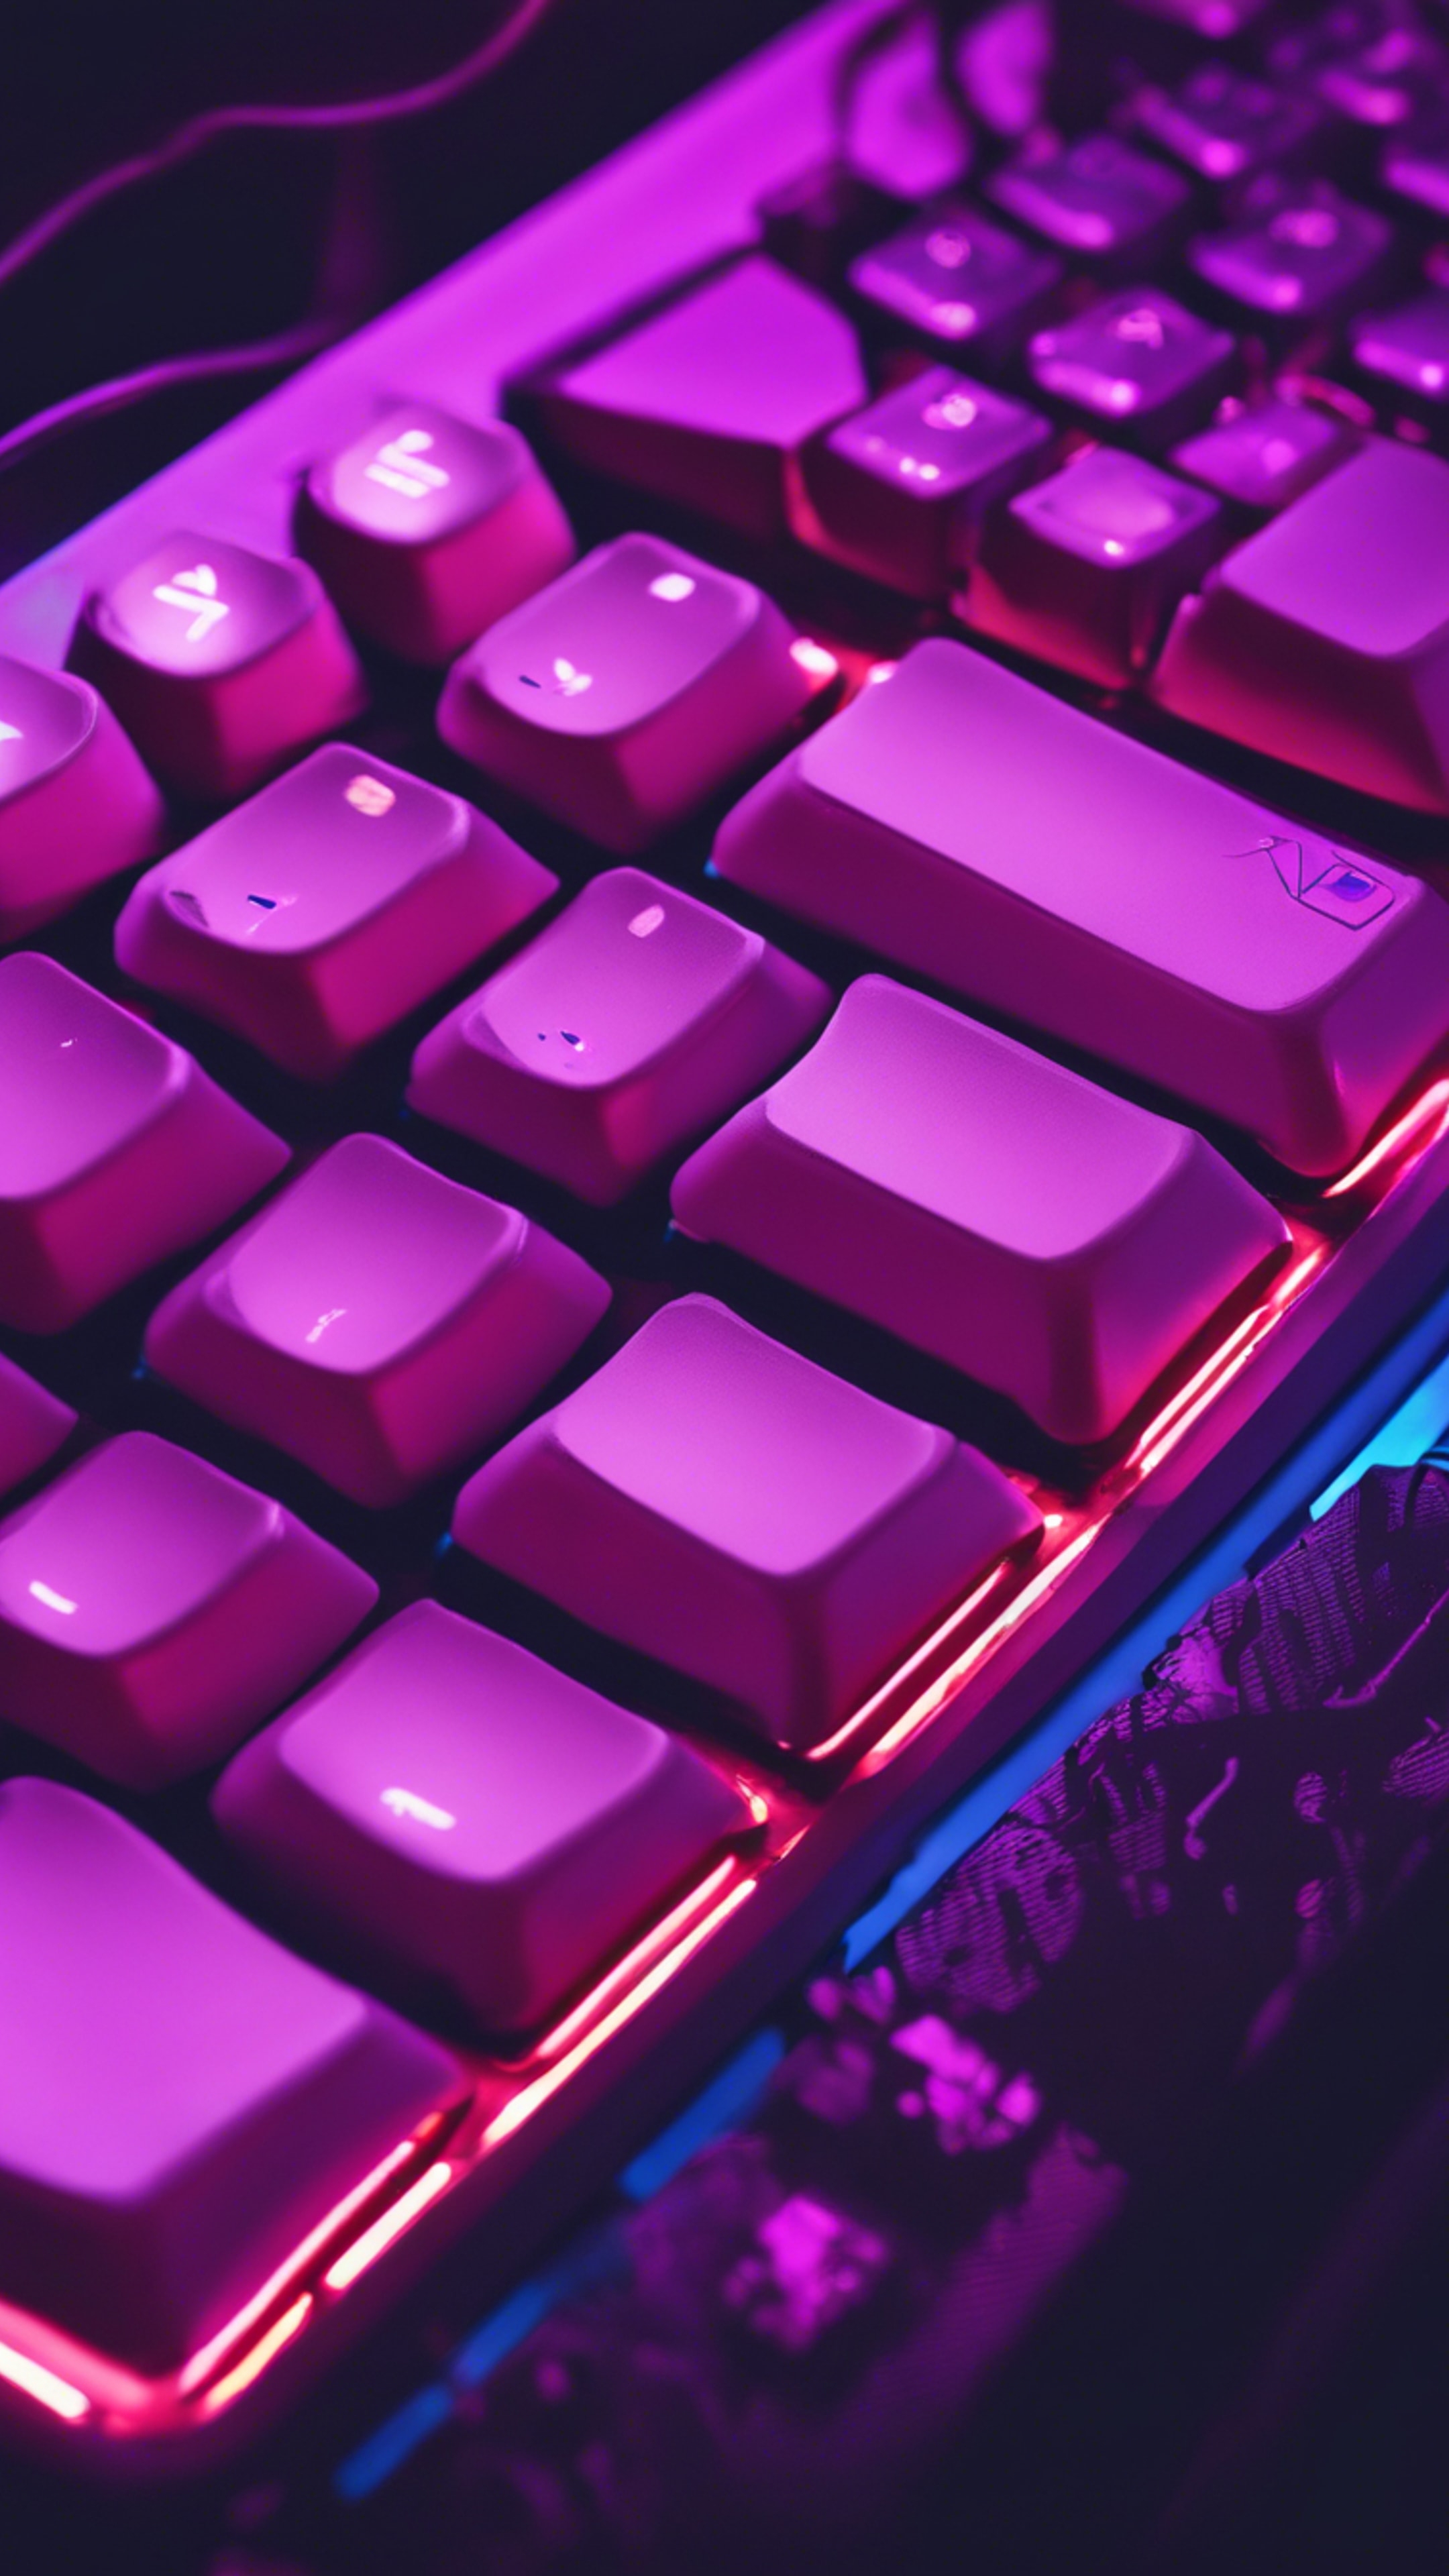 A detailed close-up image of a neon purple backlit gaming keyboard in a dark room. Wallpaper[fb3f2373aec546b8b630]